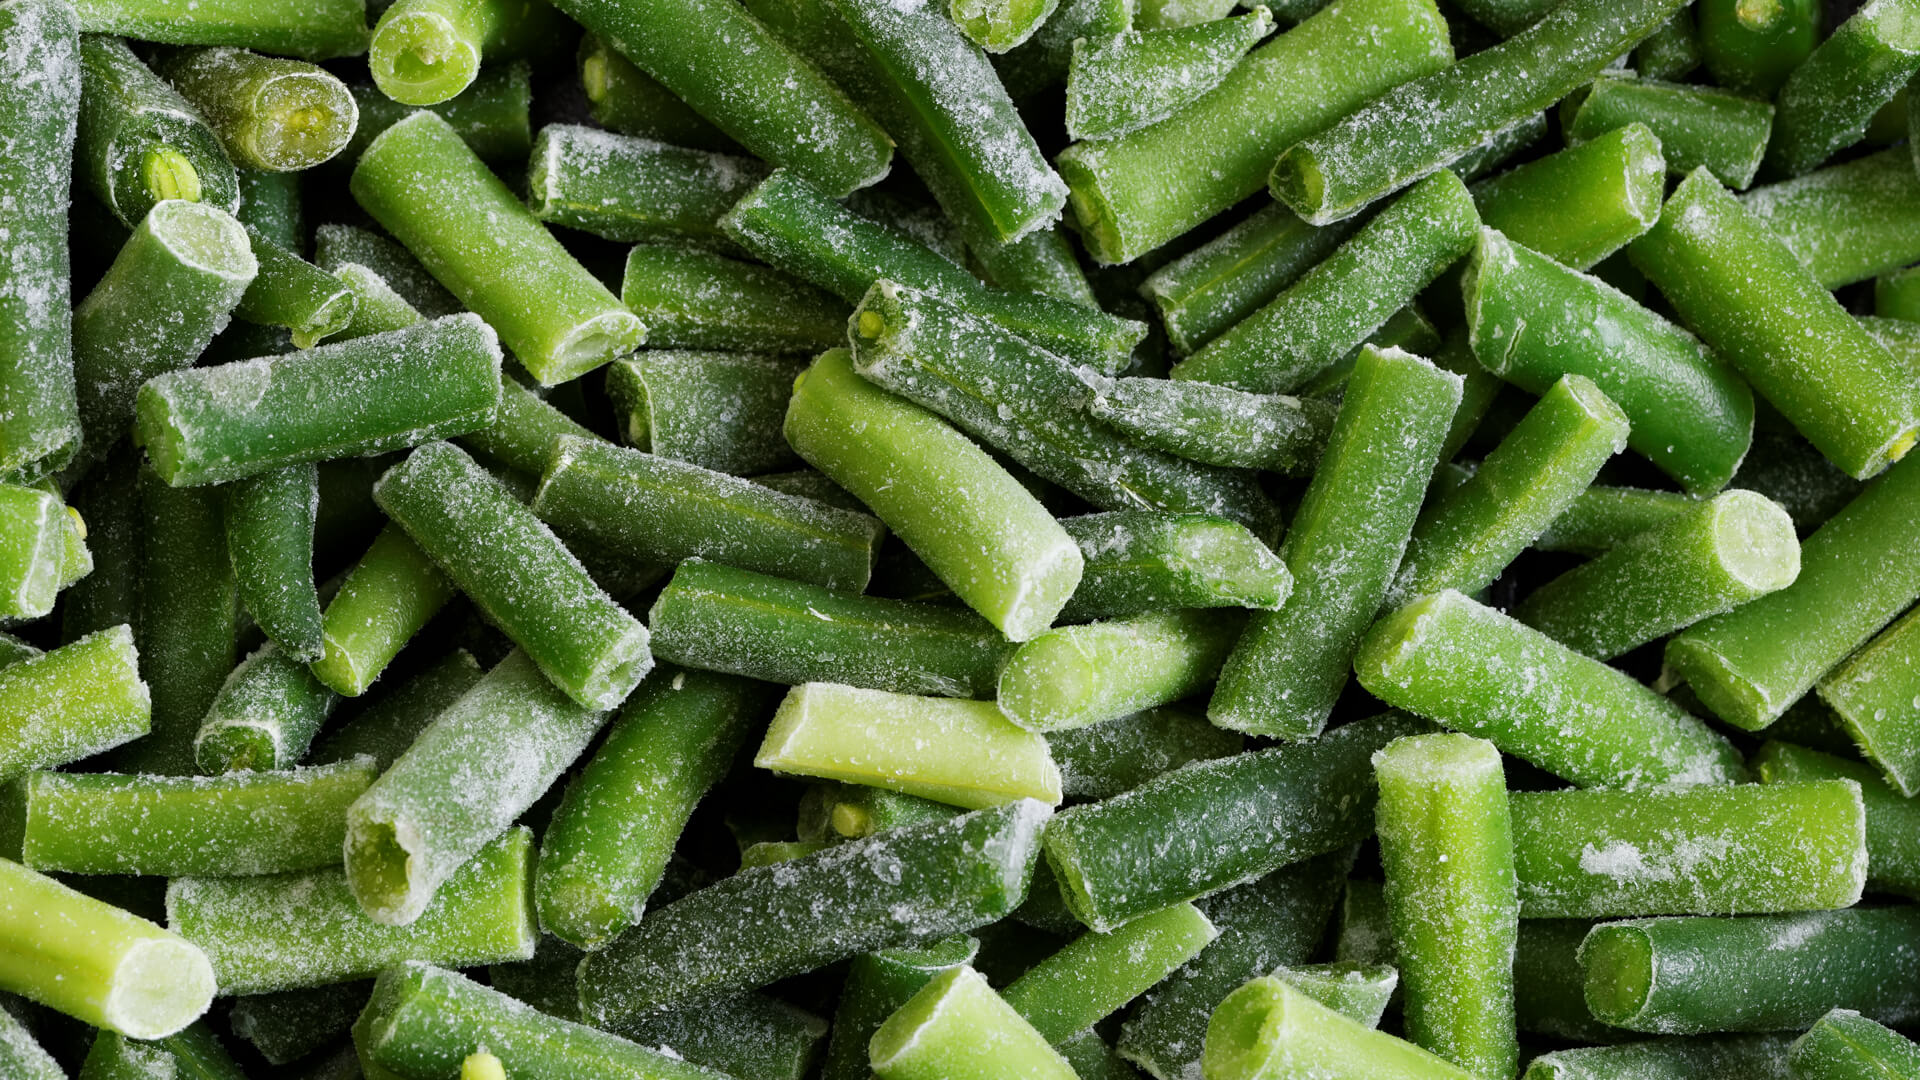 25 Cheap Frozen Foods That Are Actually Good for You